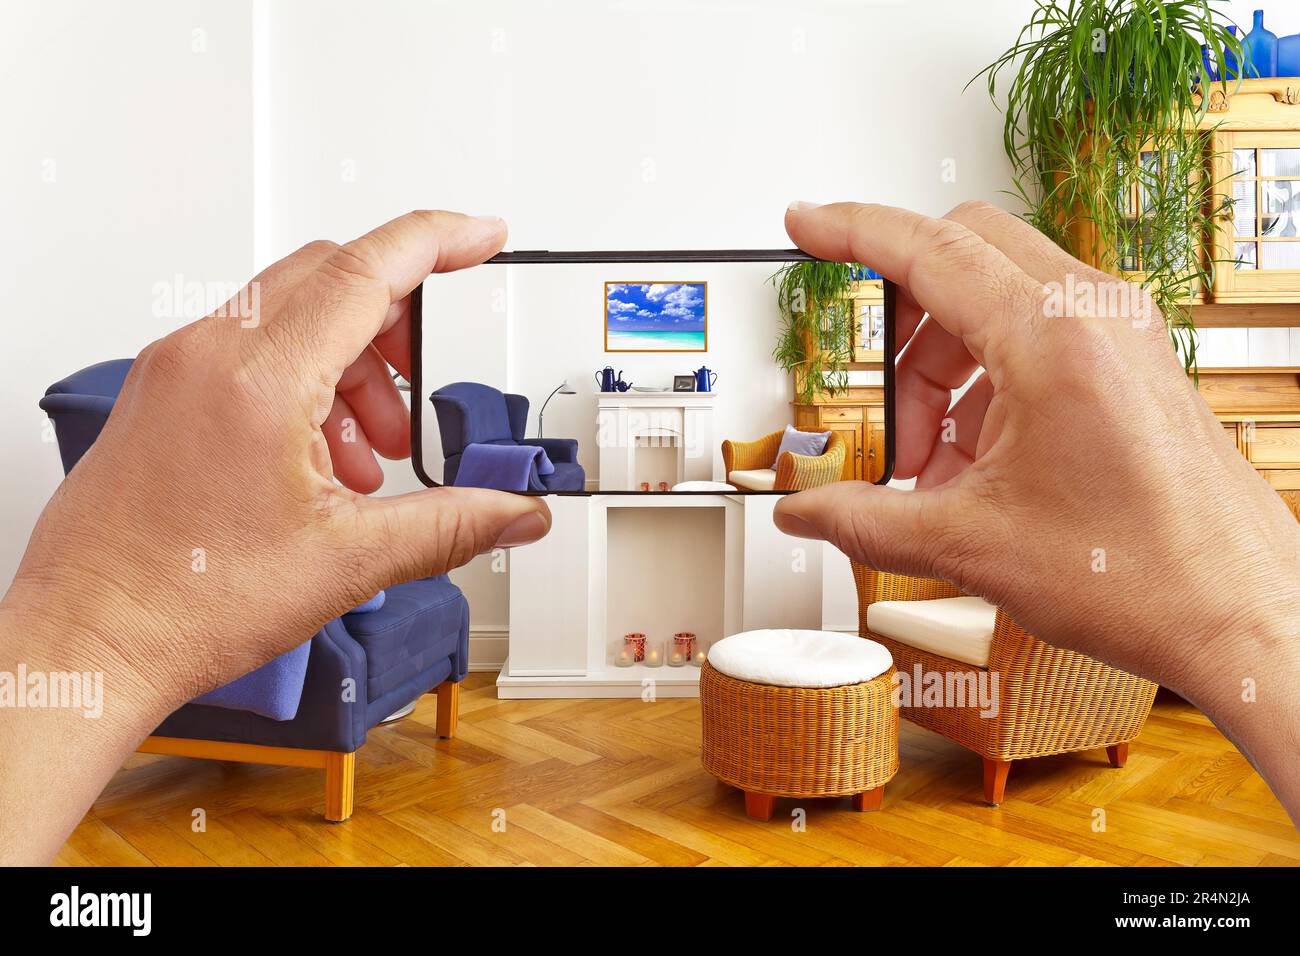 Augmented reality concept: hands holding smart phone with AR ...